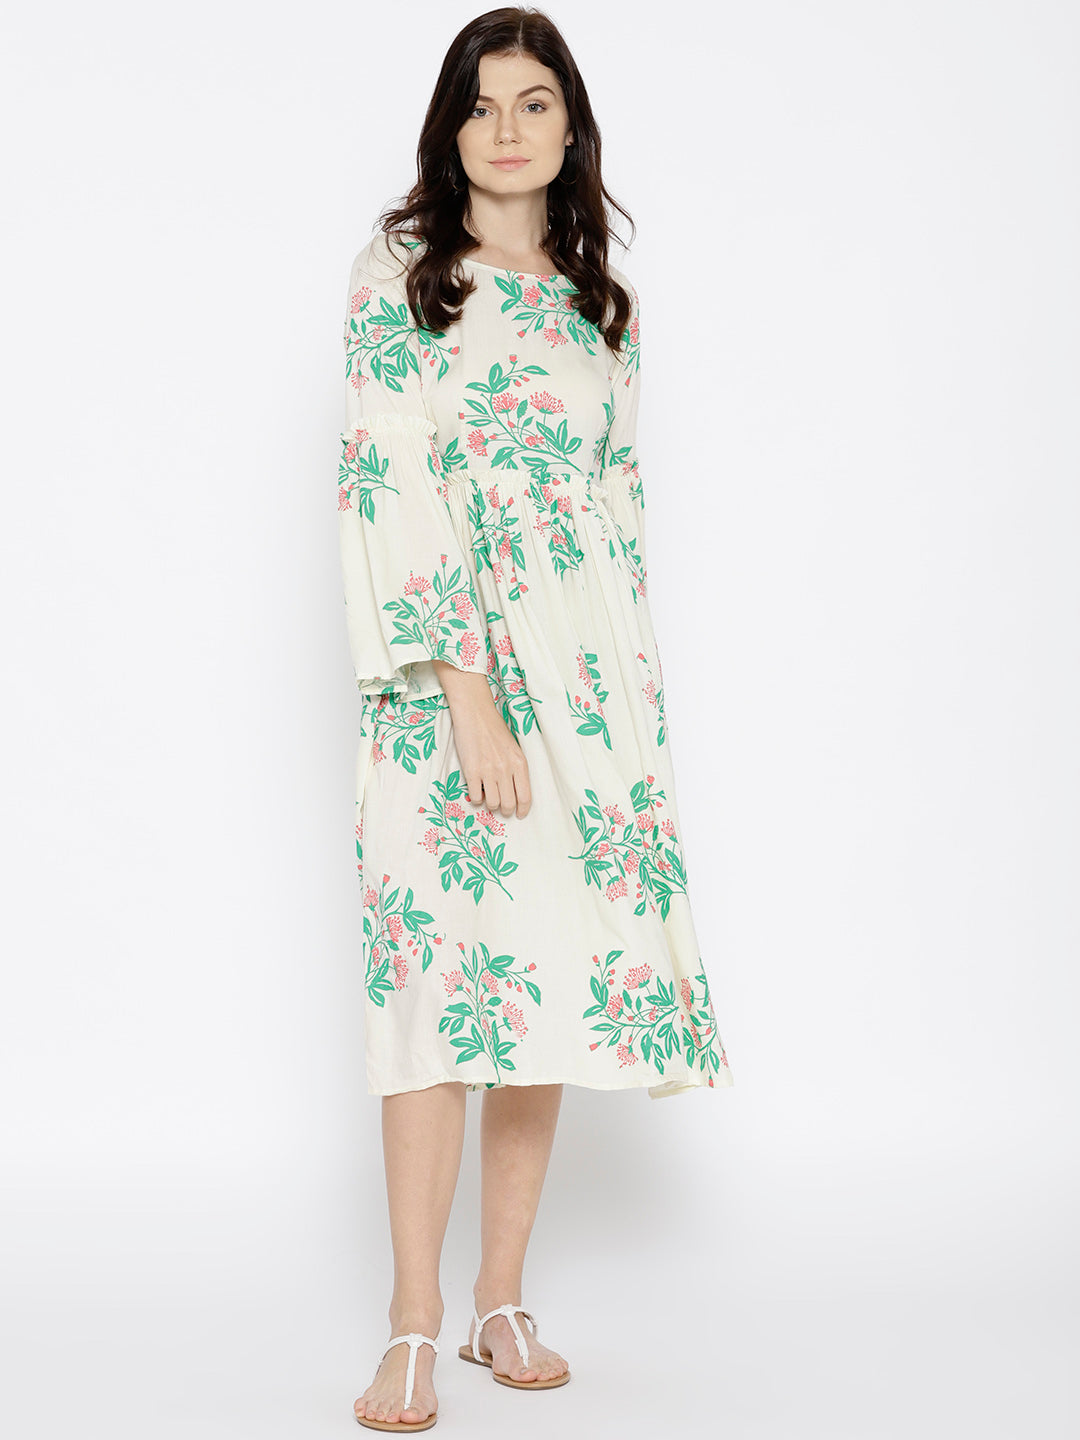 Foral Print Midi Dress with bell sleeve